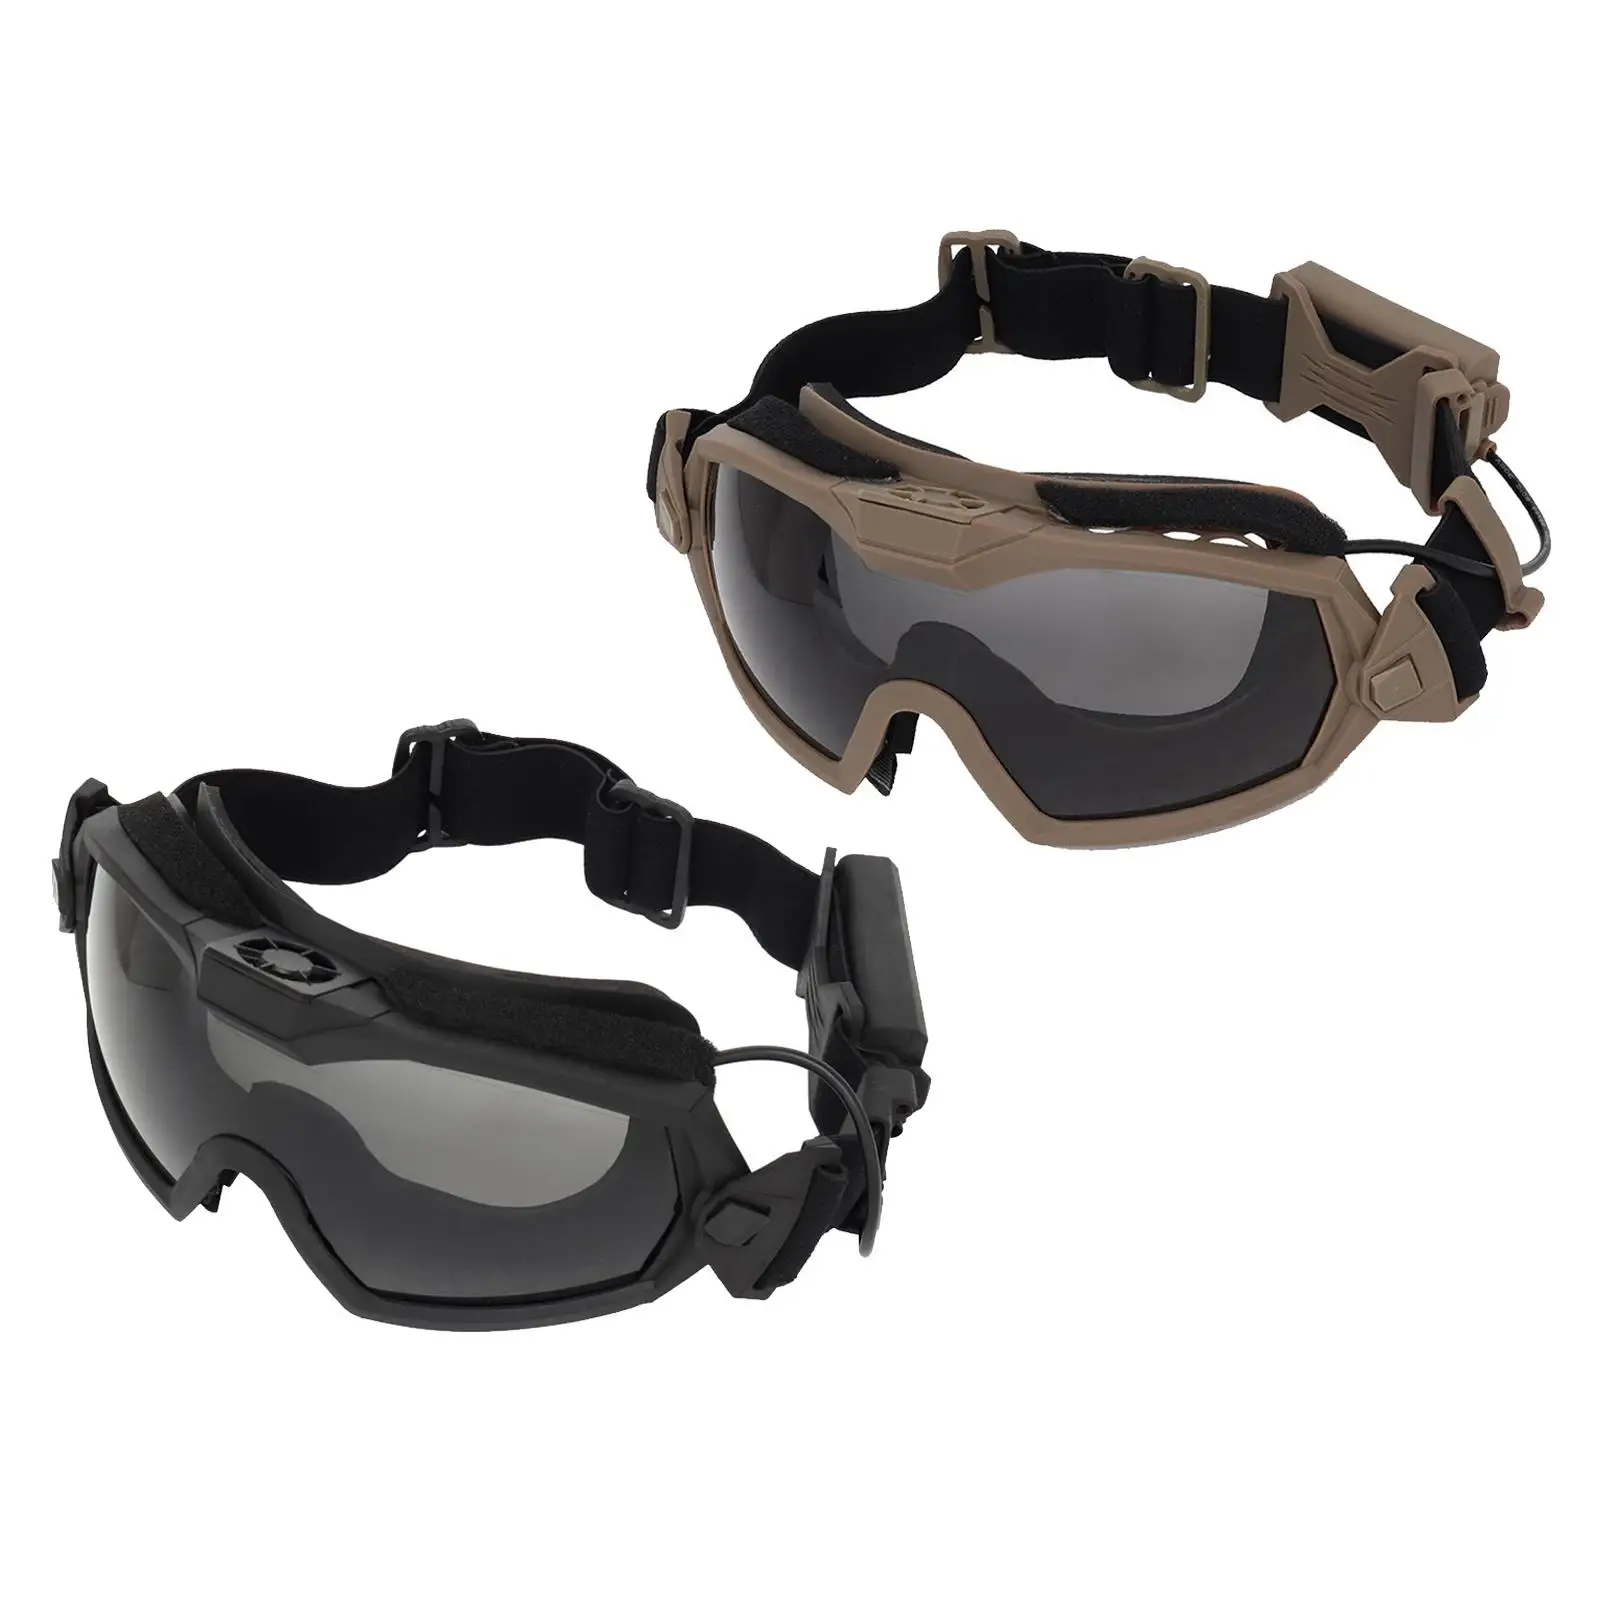 Anti-Impact Goggles with Fan, Tactical Safety Goggles Anti-Fog UV400 Glasses Eyewear with 2 Lens for Riding Shooting Hunting